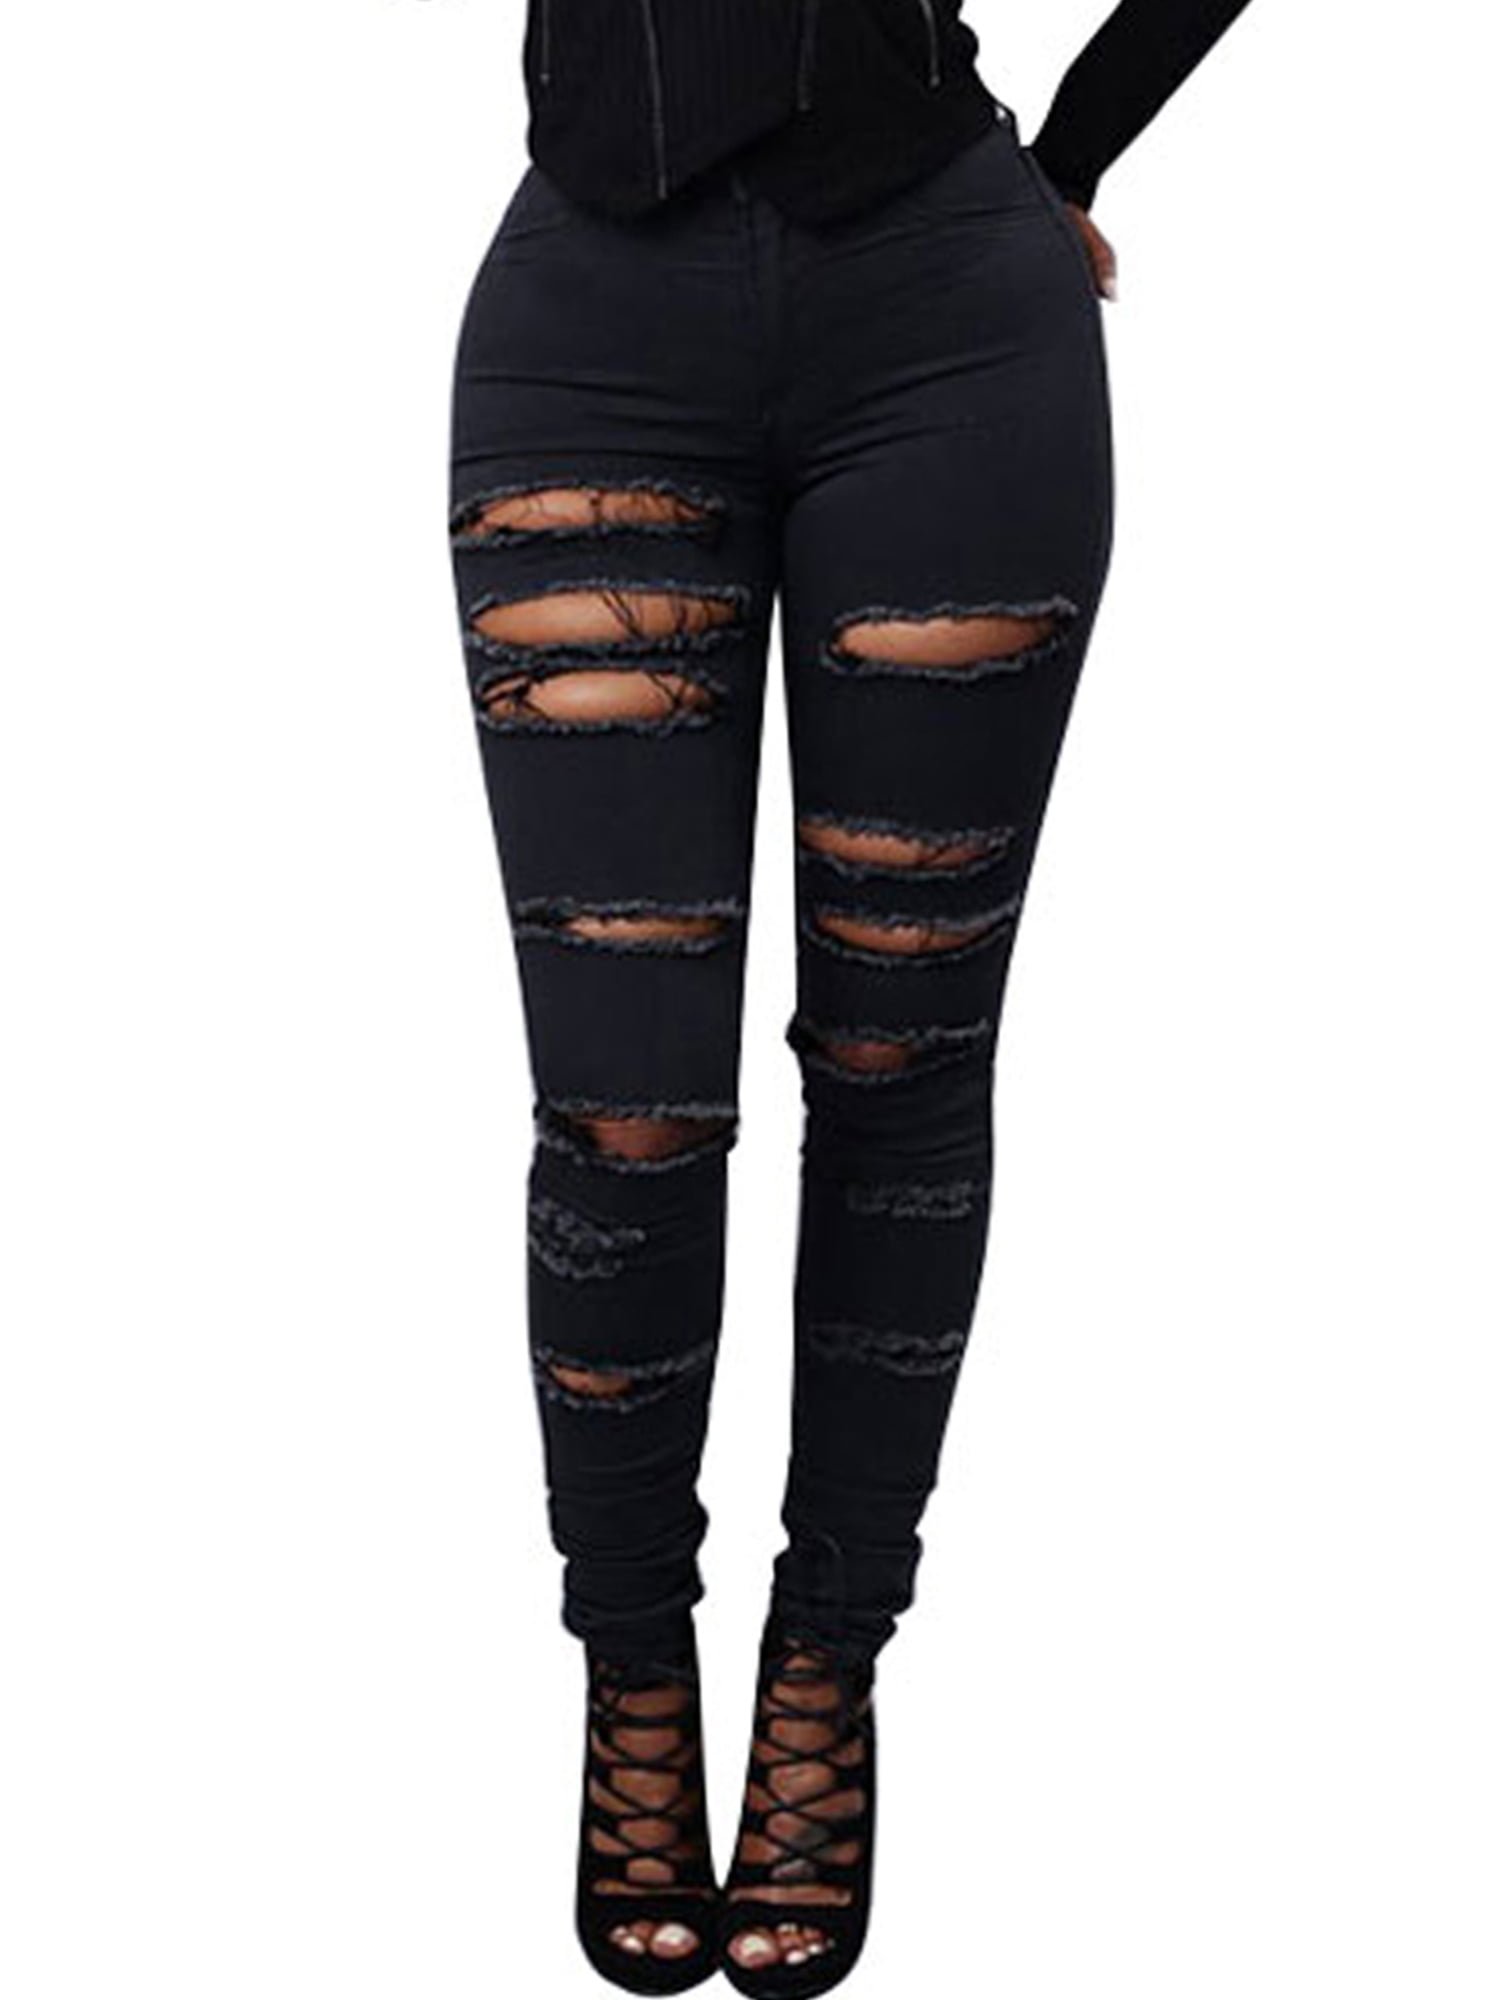 New Women Stretch Ripped Jeans Denim Pants Jeggings Casual Slim Skinny Trousers 